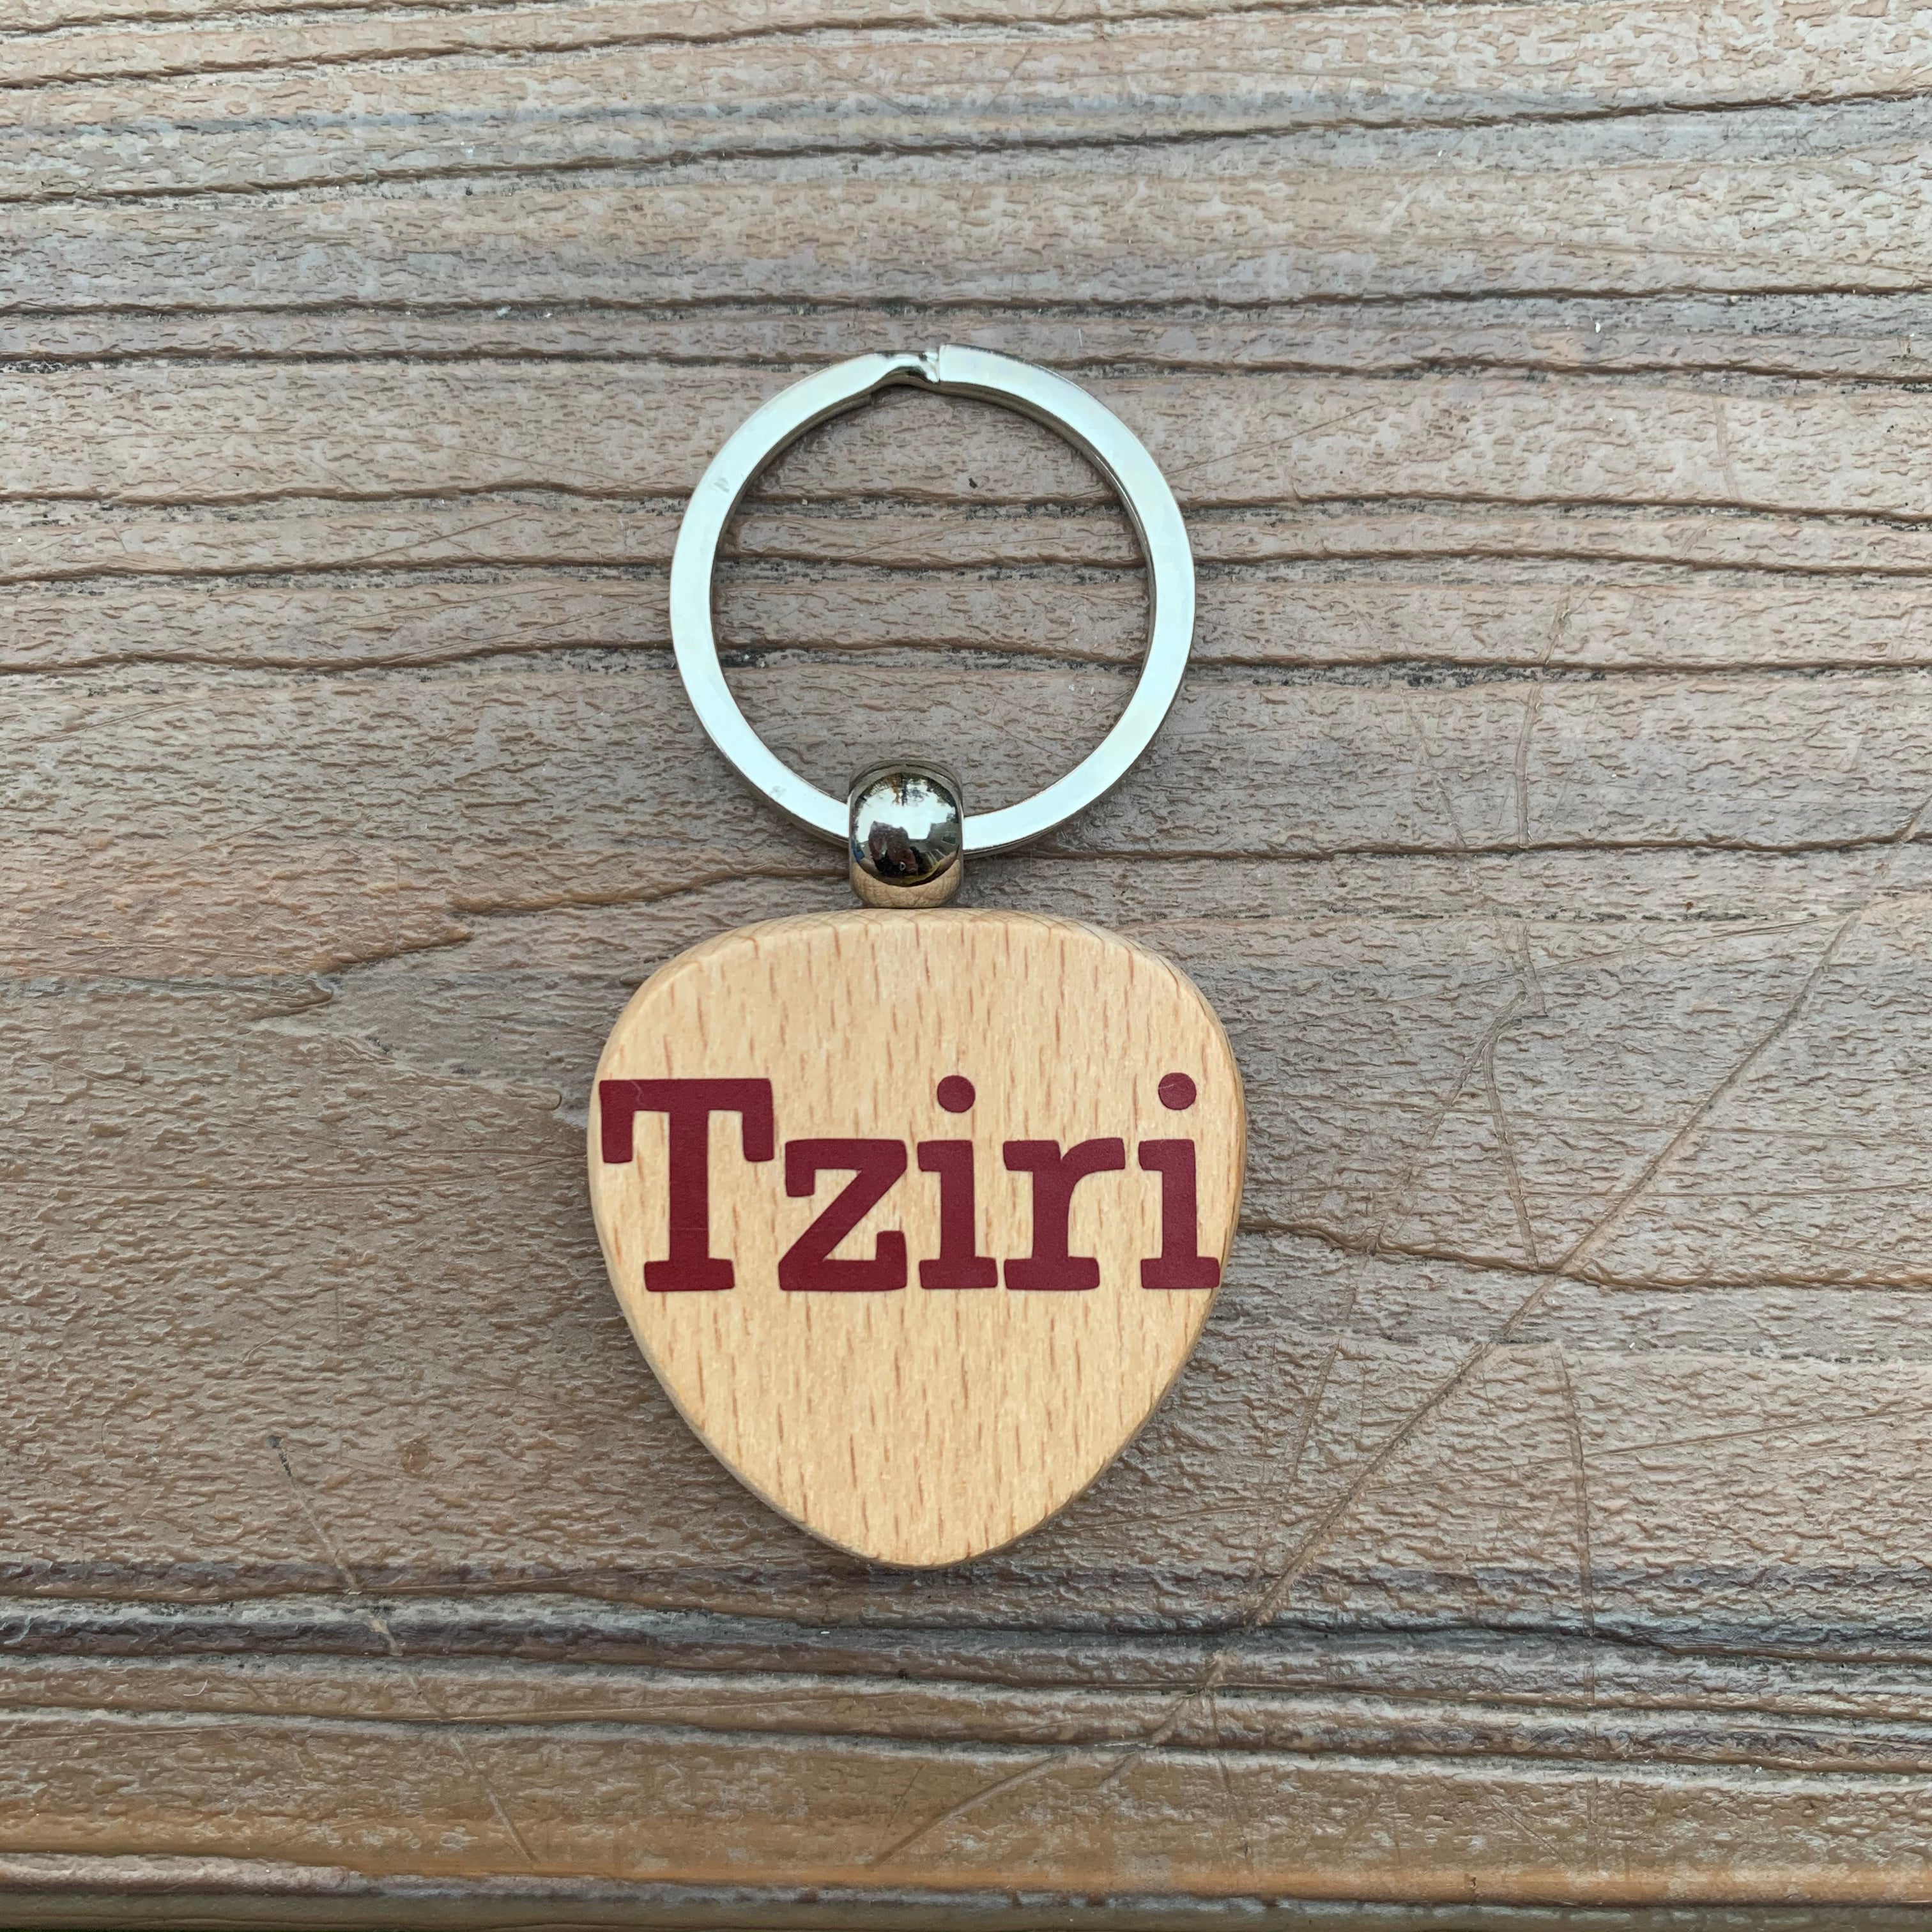 Personalized wooden keychain circle, heart, rectangle, square shape great for school, camp